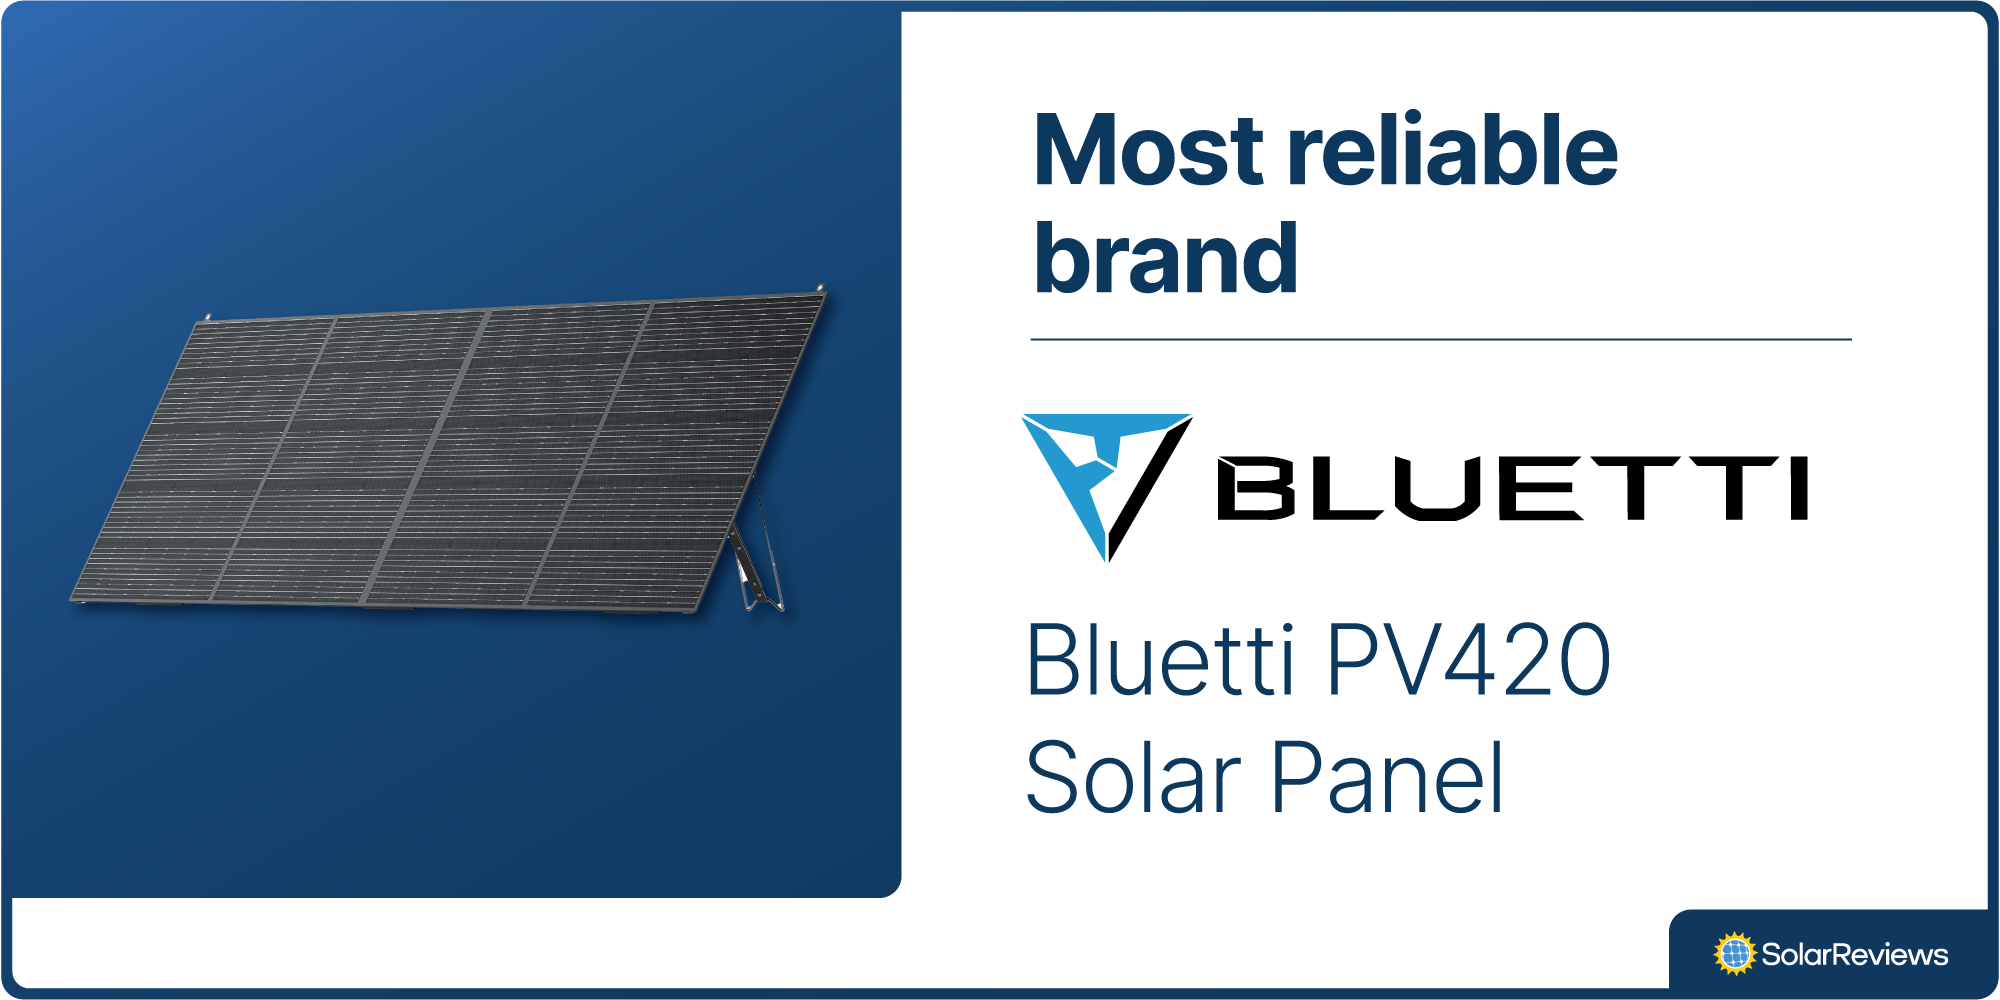 SolarReviews ranks the Bluetti PV420 Solar Panel as the most reliable brand to buy from for an RV solar panel.